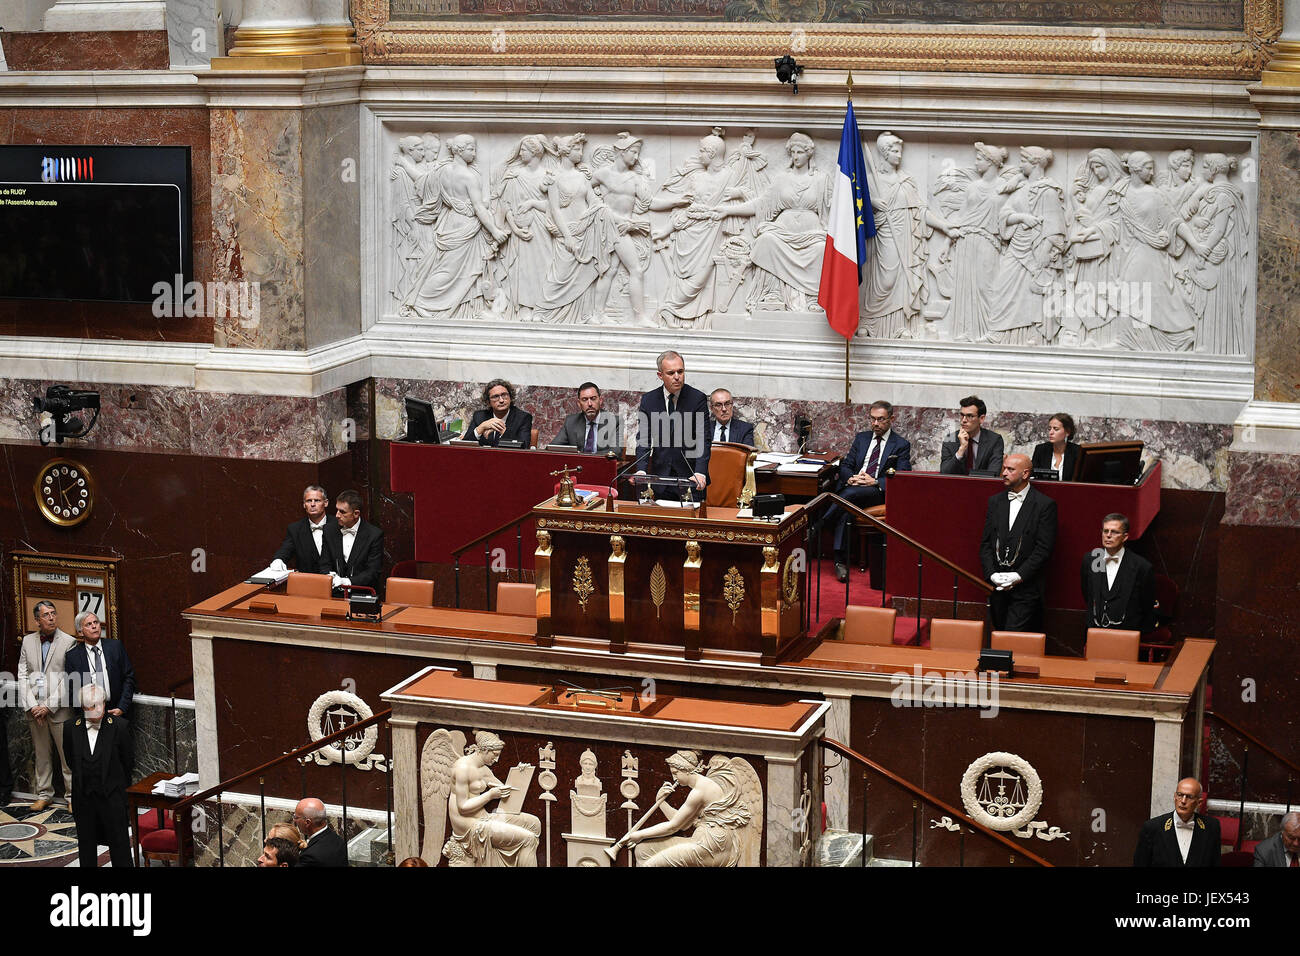 Paris, France. 27th June, 2017. Newly-elected speaker of the French National Assembly Francois de Rugy (C) of "La Republique en Marche" (Republic on the Move or LREM) political party delivers a speech during the opening session at the National Assembly in Paris, France, June 27, 2017. Credit: Jack Chan/Xinhua/Alamy Live News Stock Photo